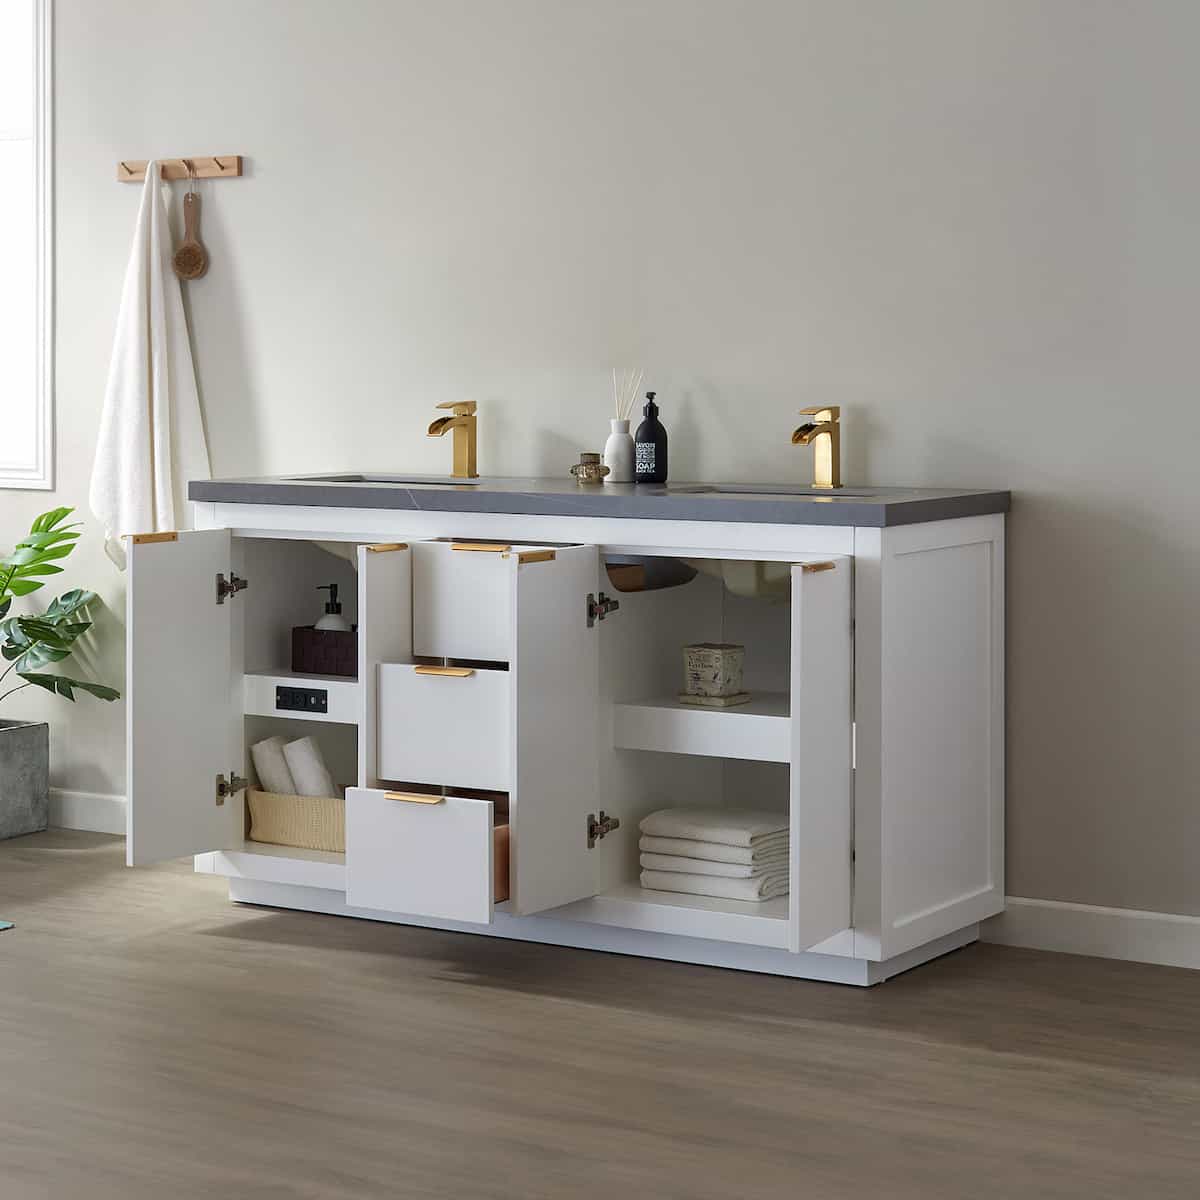 Vinnova Leiza 60 Inch Freestanding Double Vanity in White with Grey Sintered Stone Countertop Without Mirror Inside 701560-WH-ALB-NM